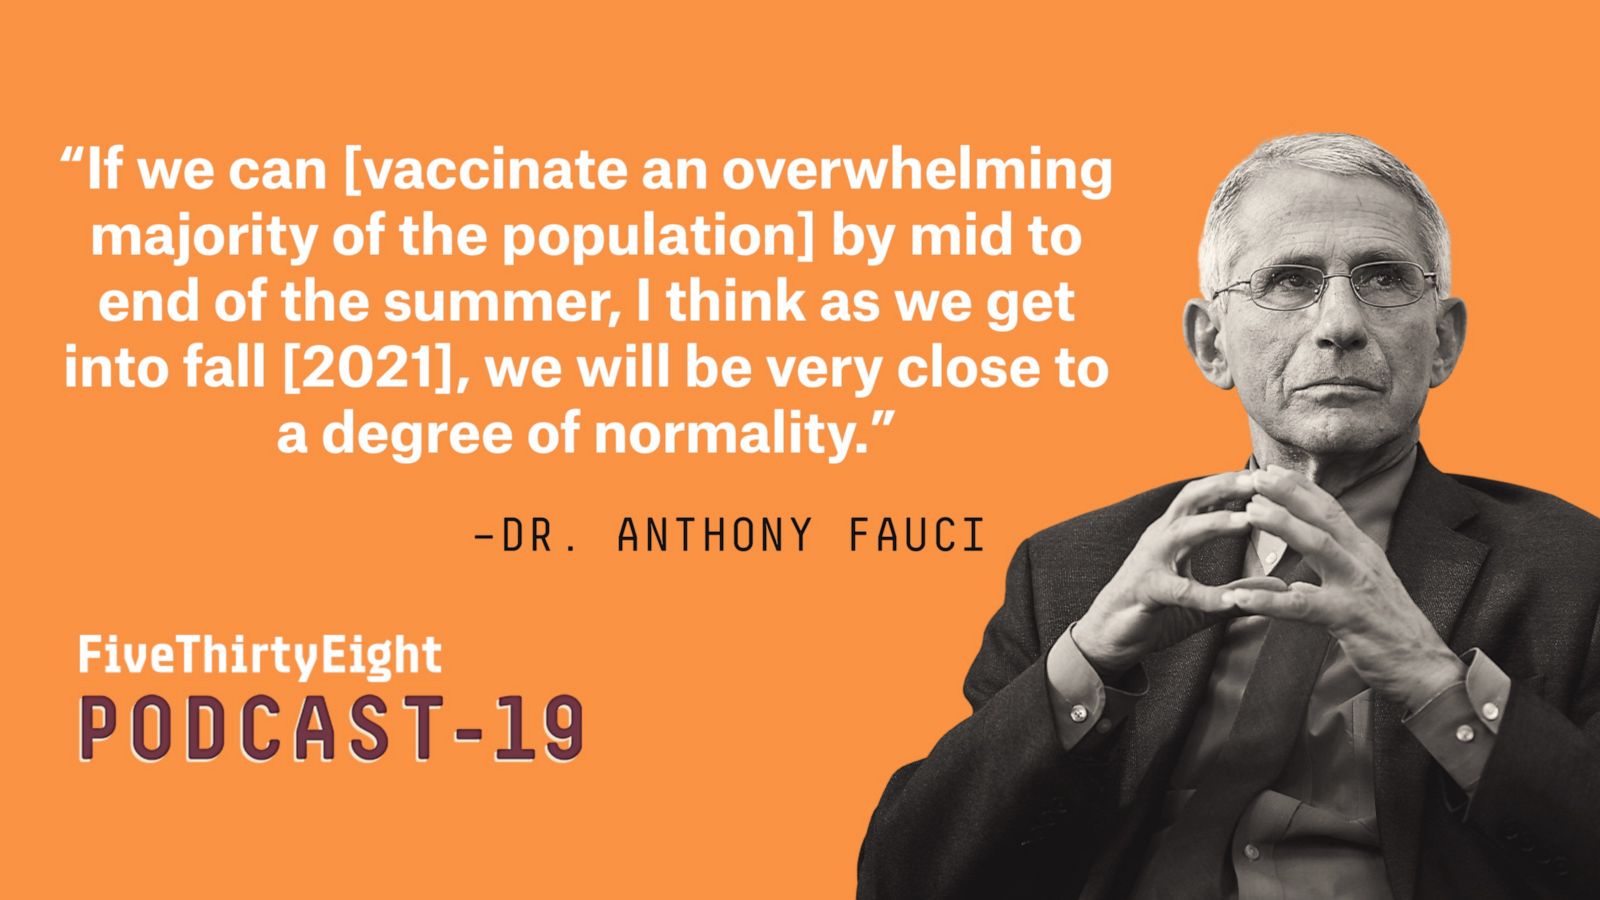 Dr. Anthony Fauci on when the country will get back to normal | FiveThirtyEight